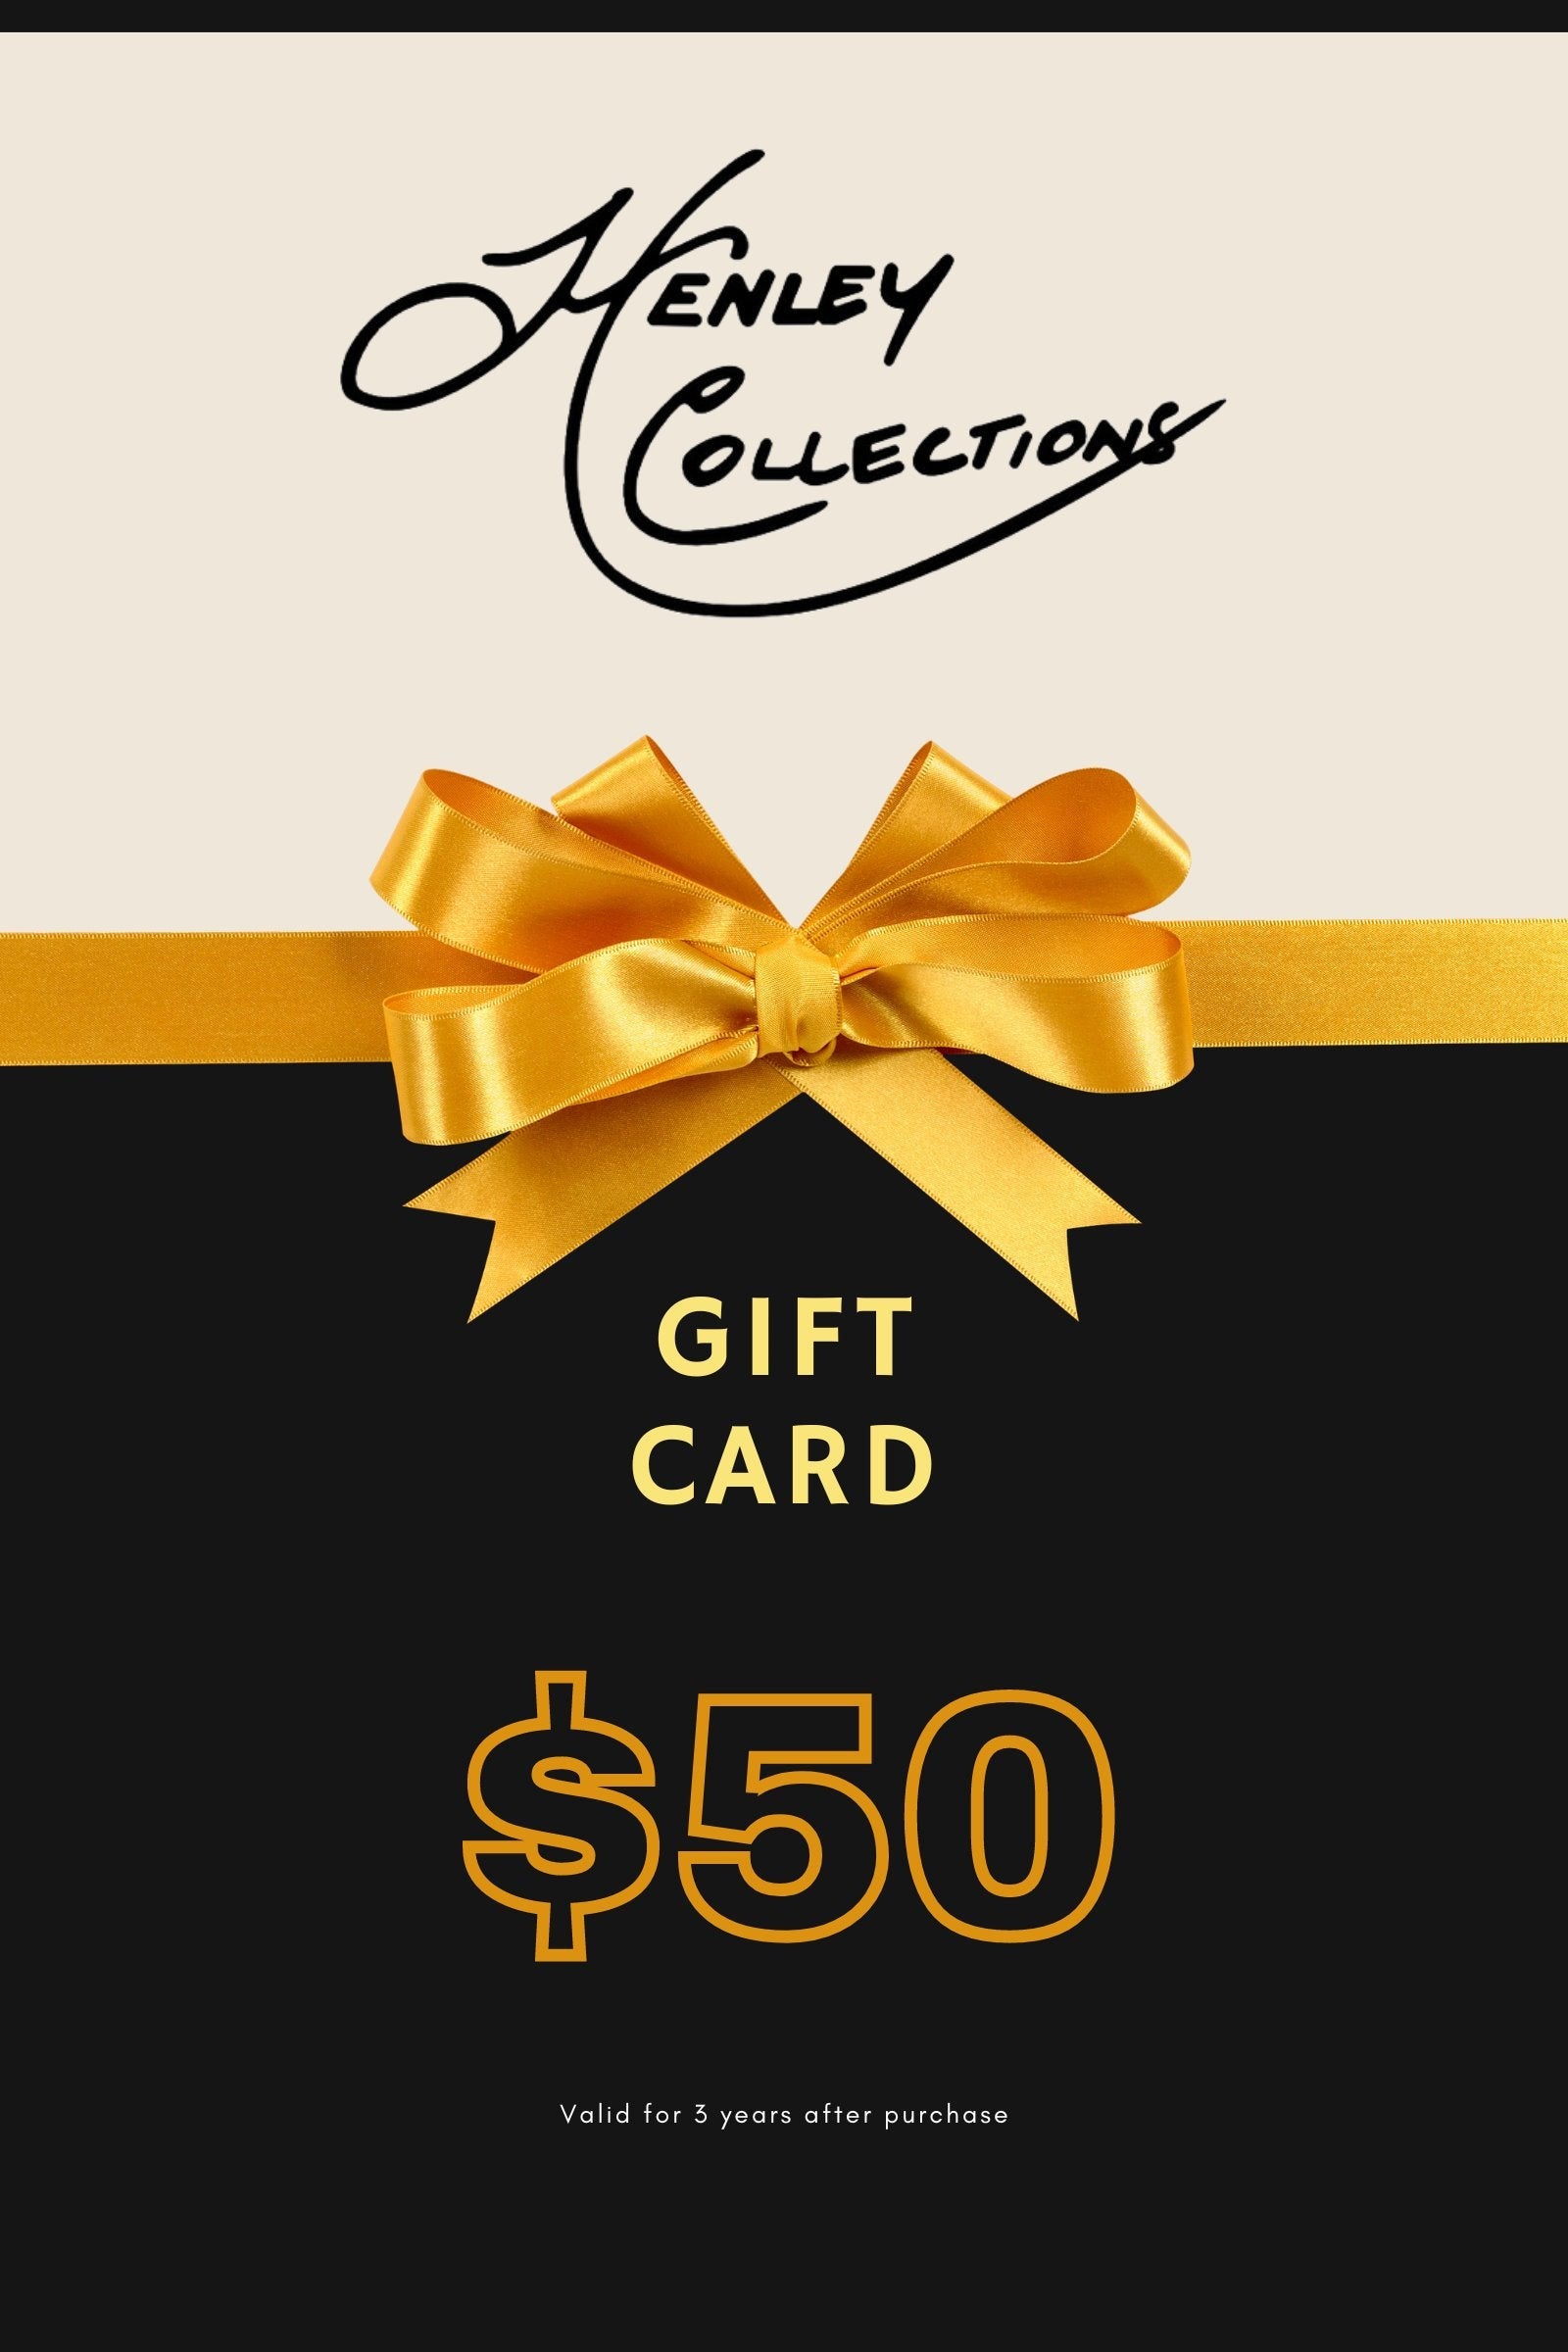 GIFT CARDS FROM "HENLEY COLLECTIONS" henleycollections